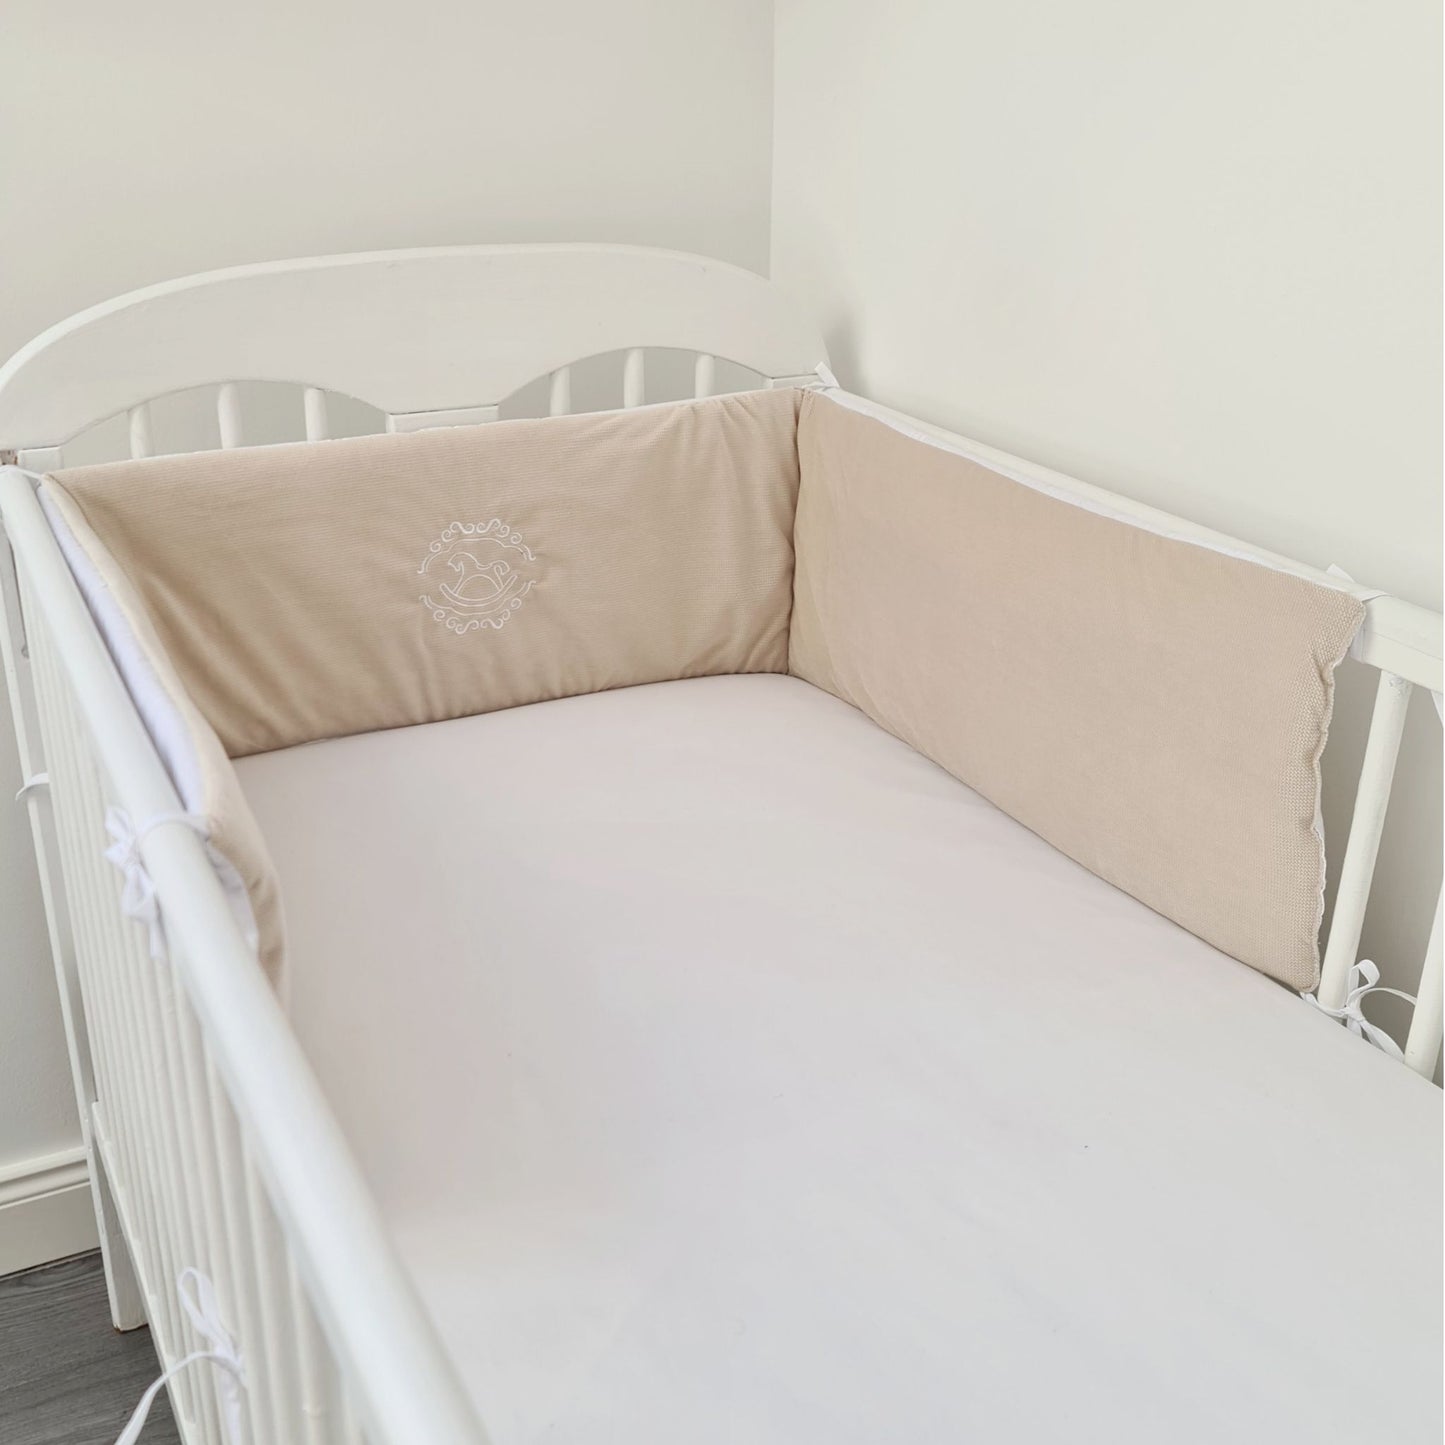 velvet and cotton bumpers set for cot bed 70x140cm protectors for cot rungs